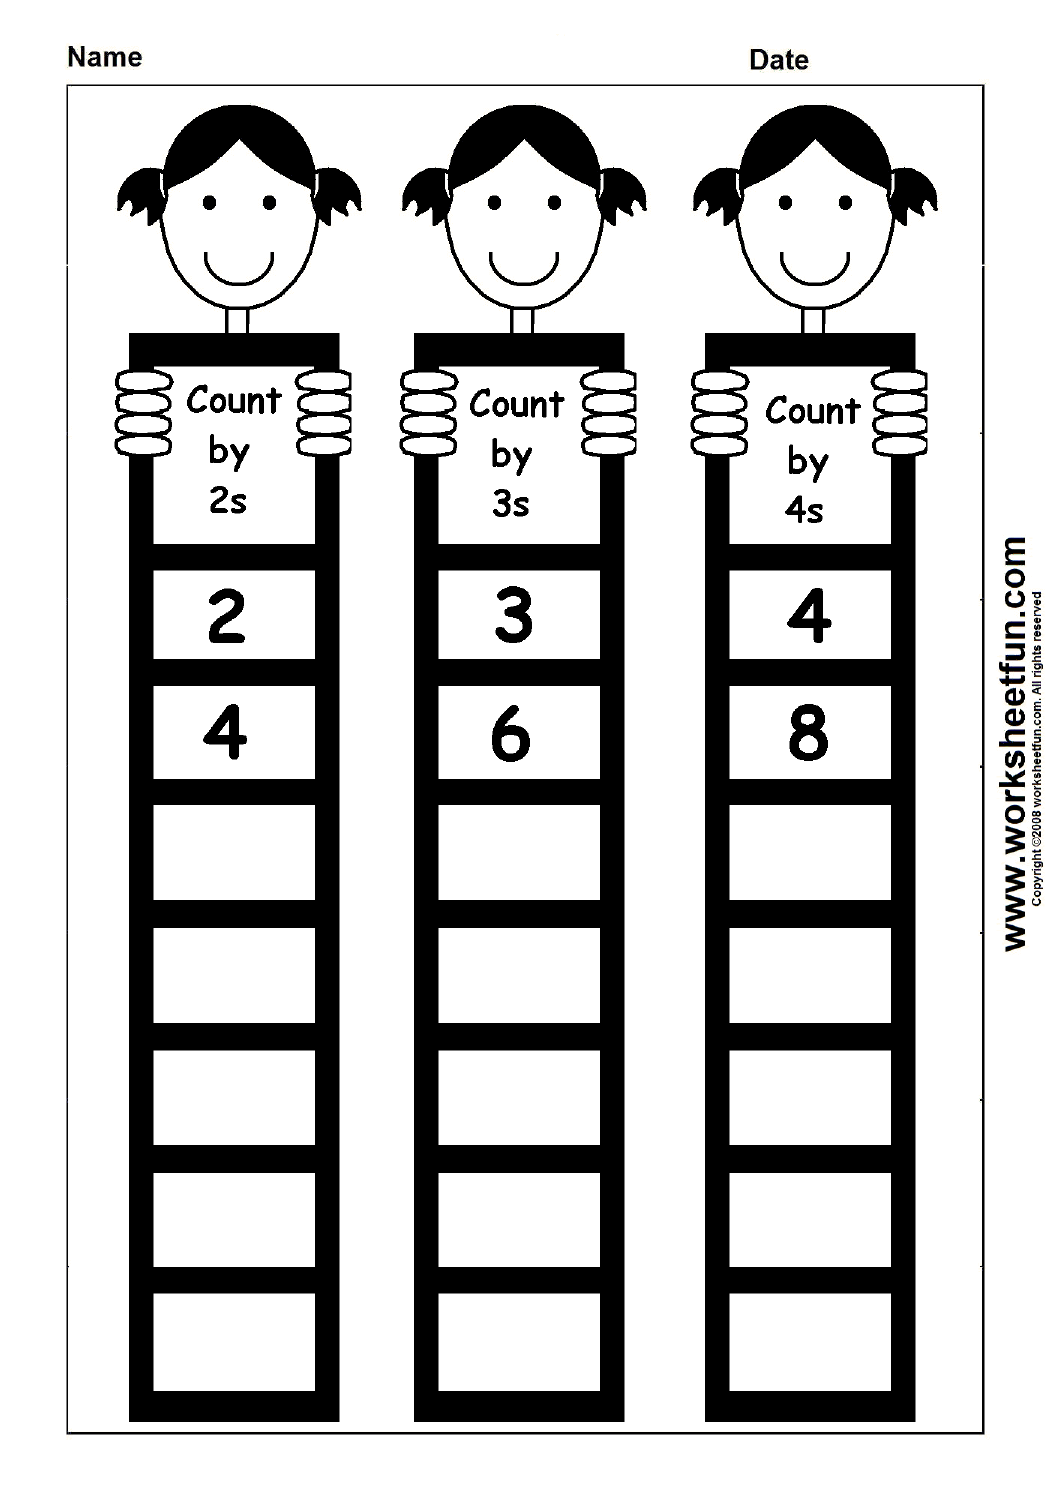 Skip Counting by 10 Worksheets Image